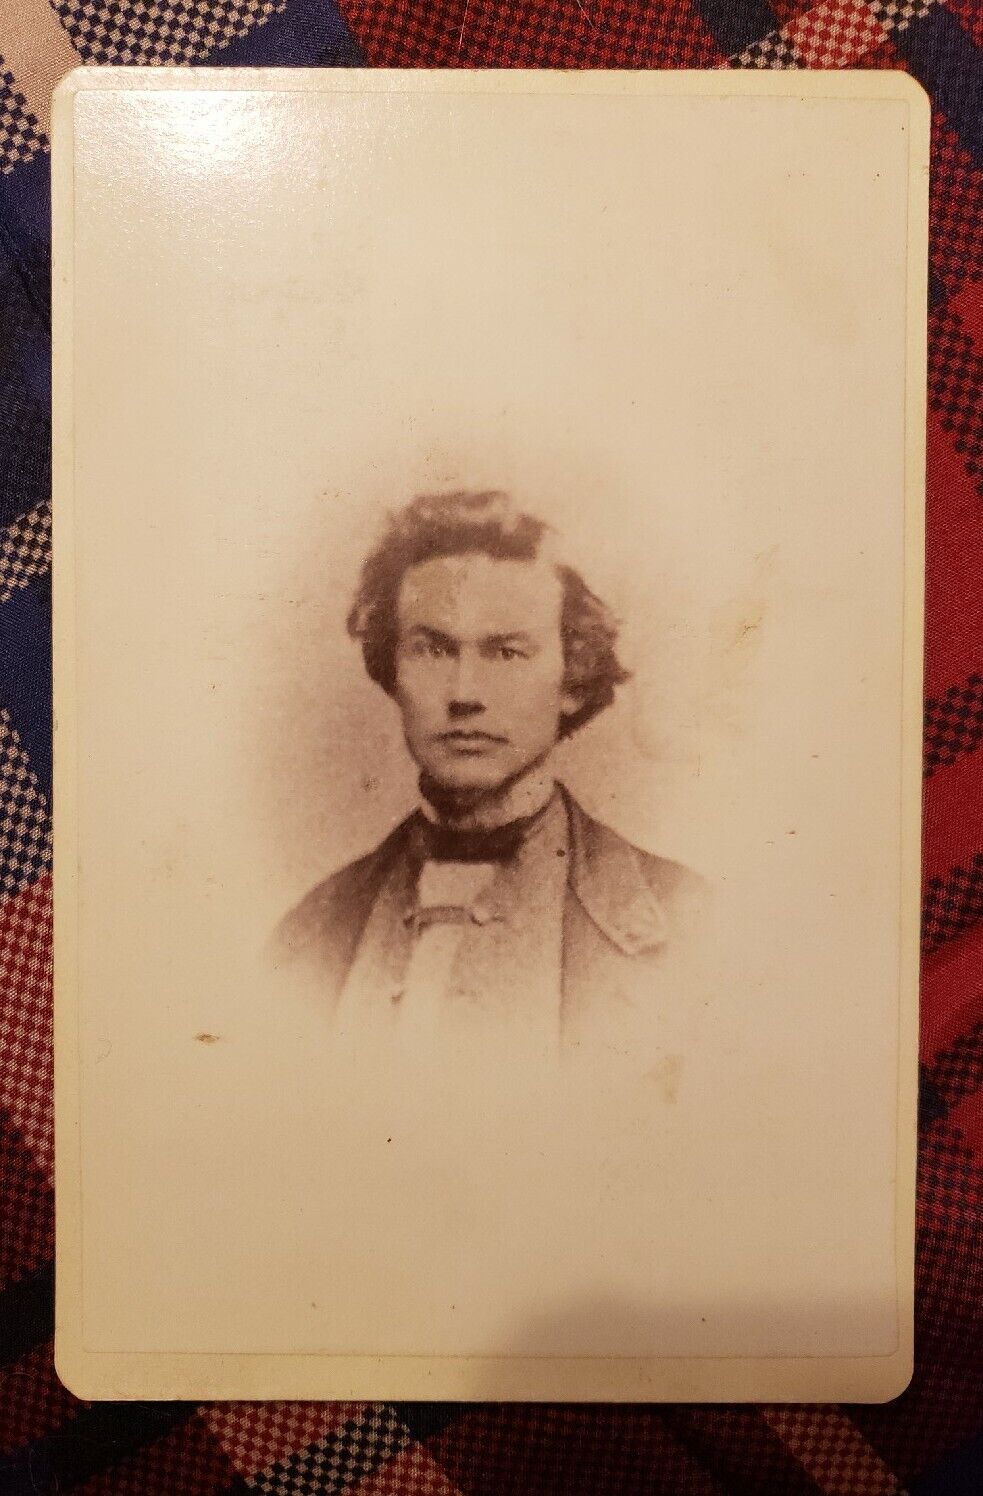 1860s CIVIL WAR SOLDIER. RARE CABINET CARD. COURAGIOUS HERO.